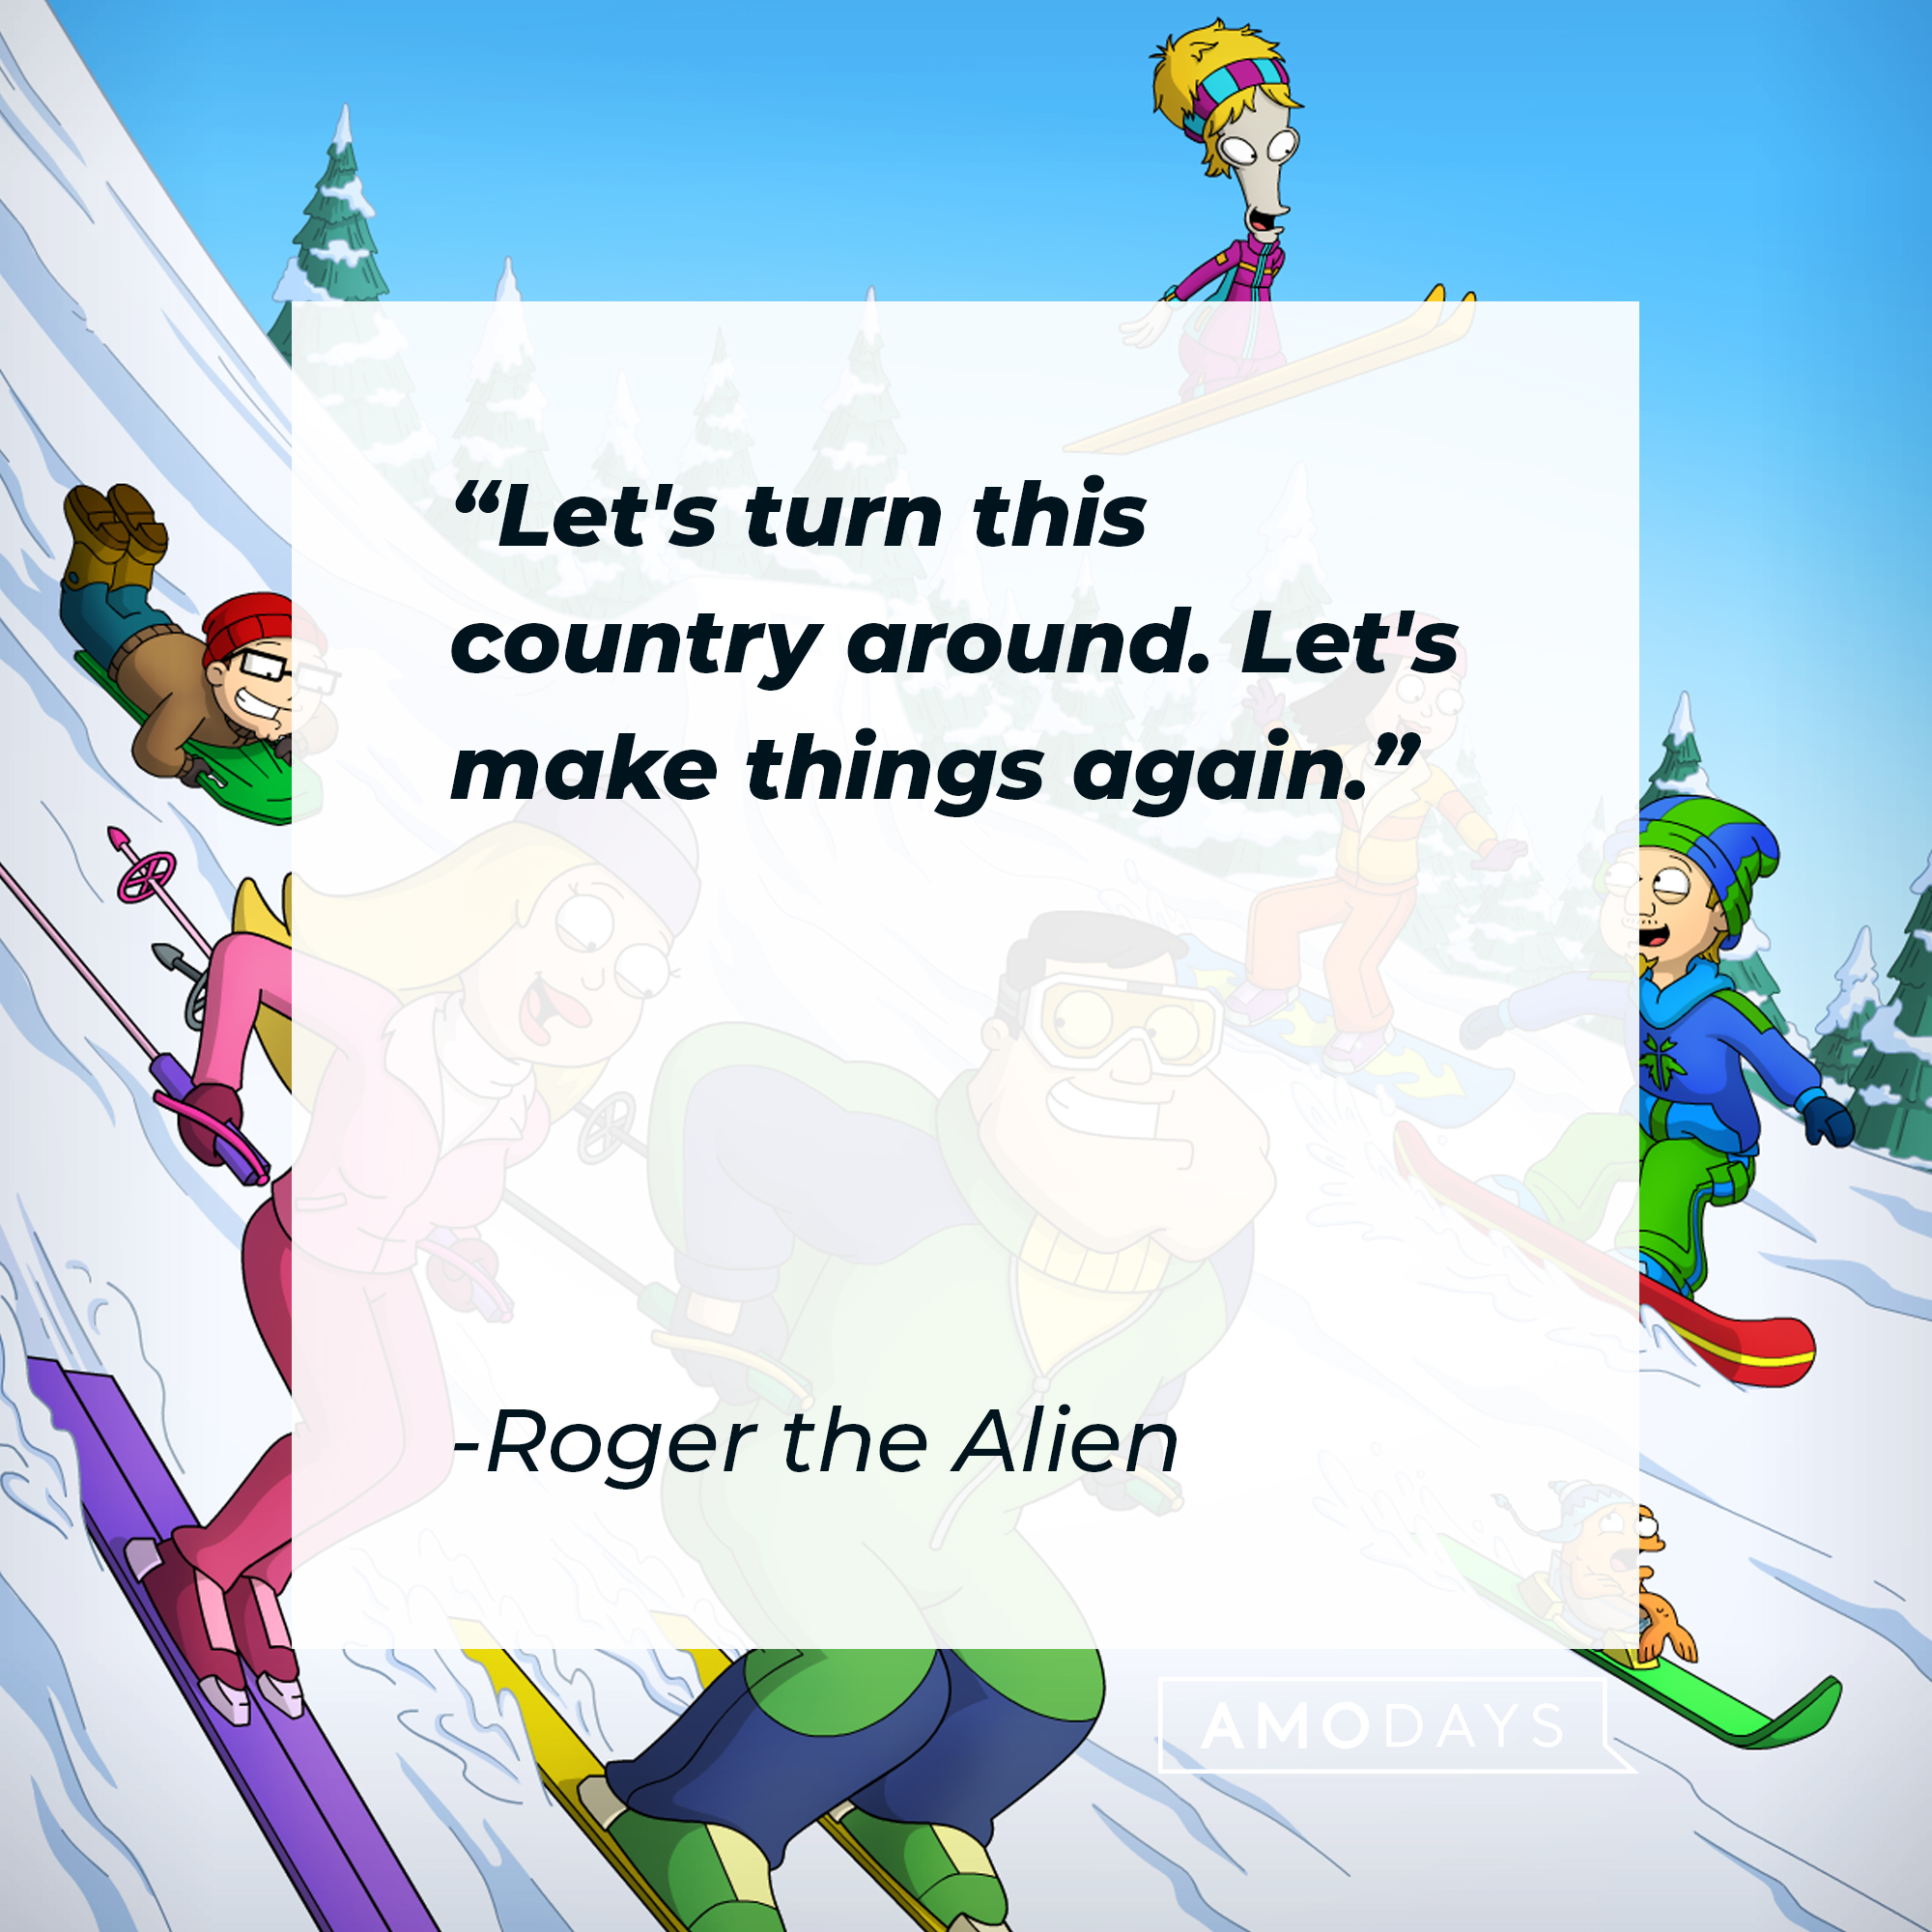 Roger the Alien's quote: "Let's turn this country around. Let's make things again."| Source: facebook.com/AmericanDad